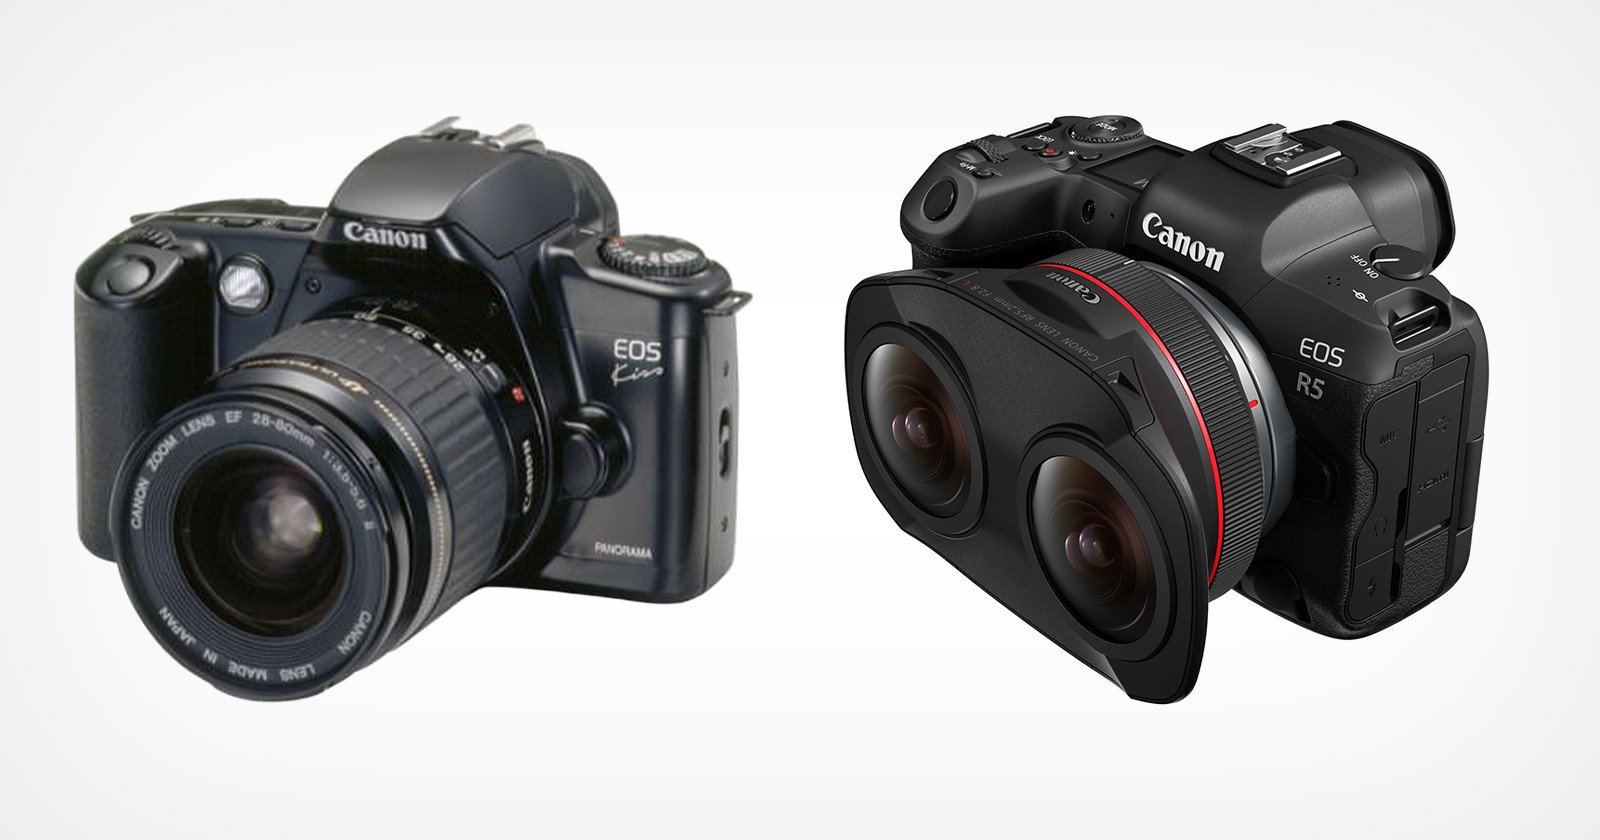  canon eos turns look back decades camera innovations 